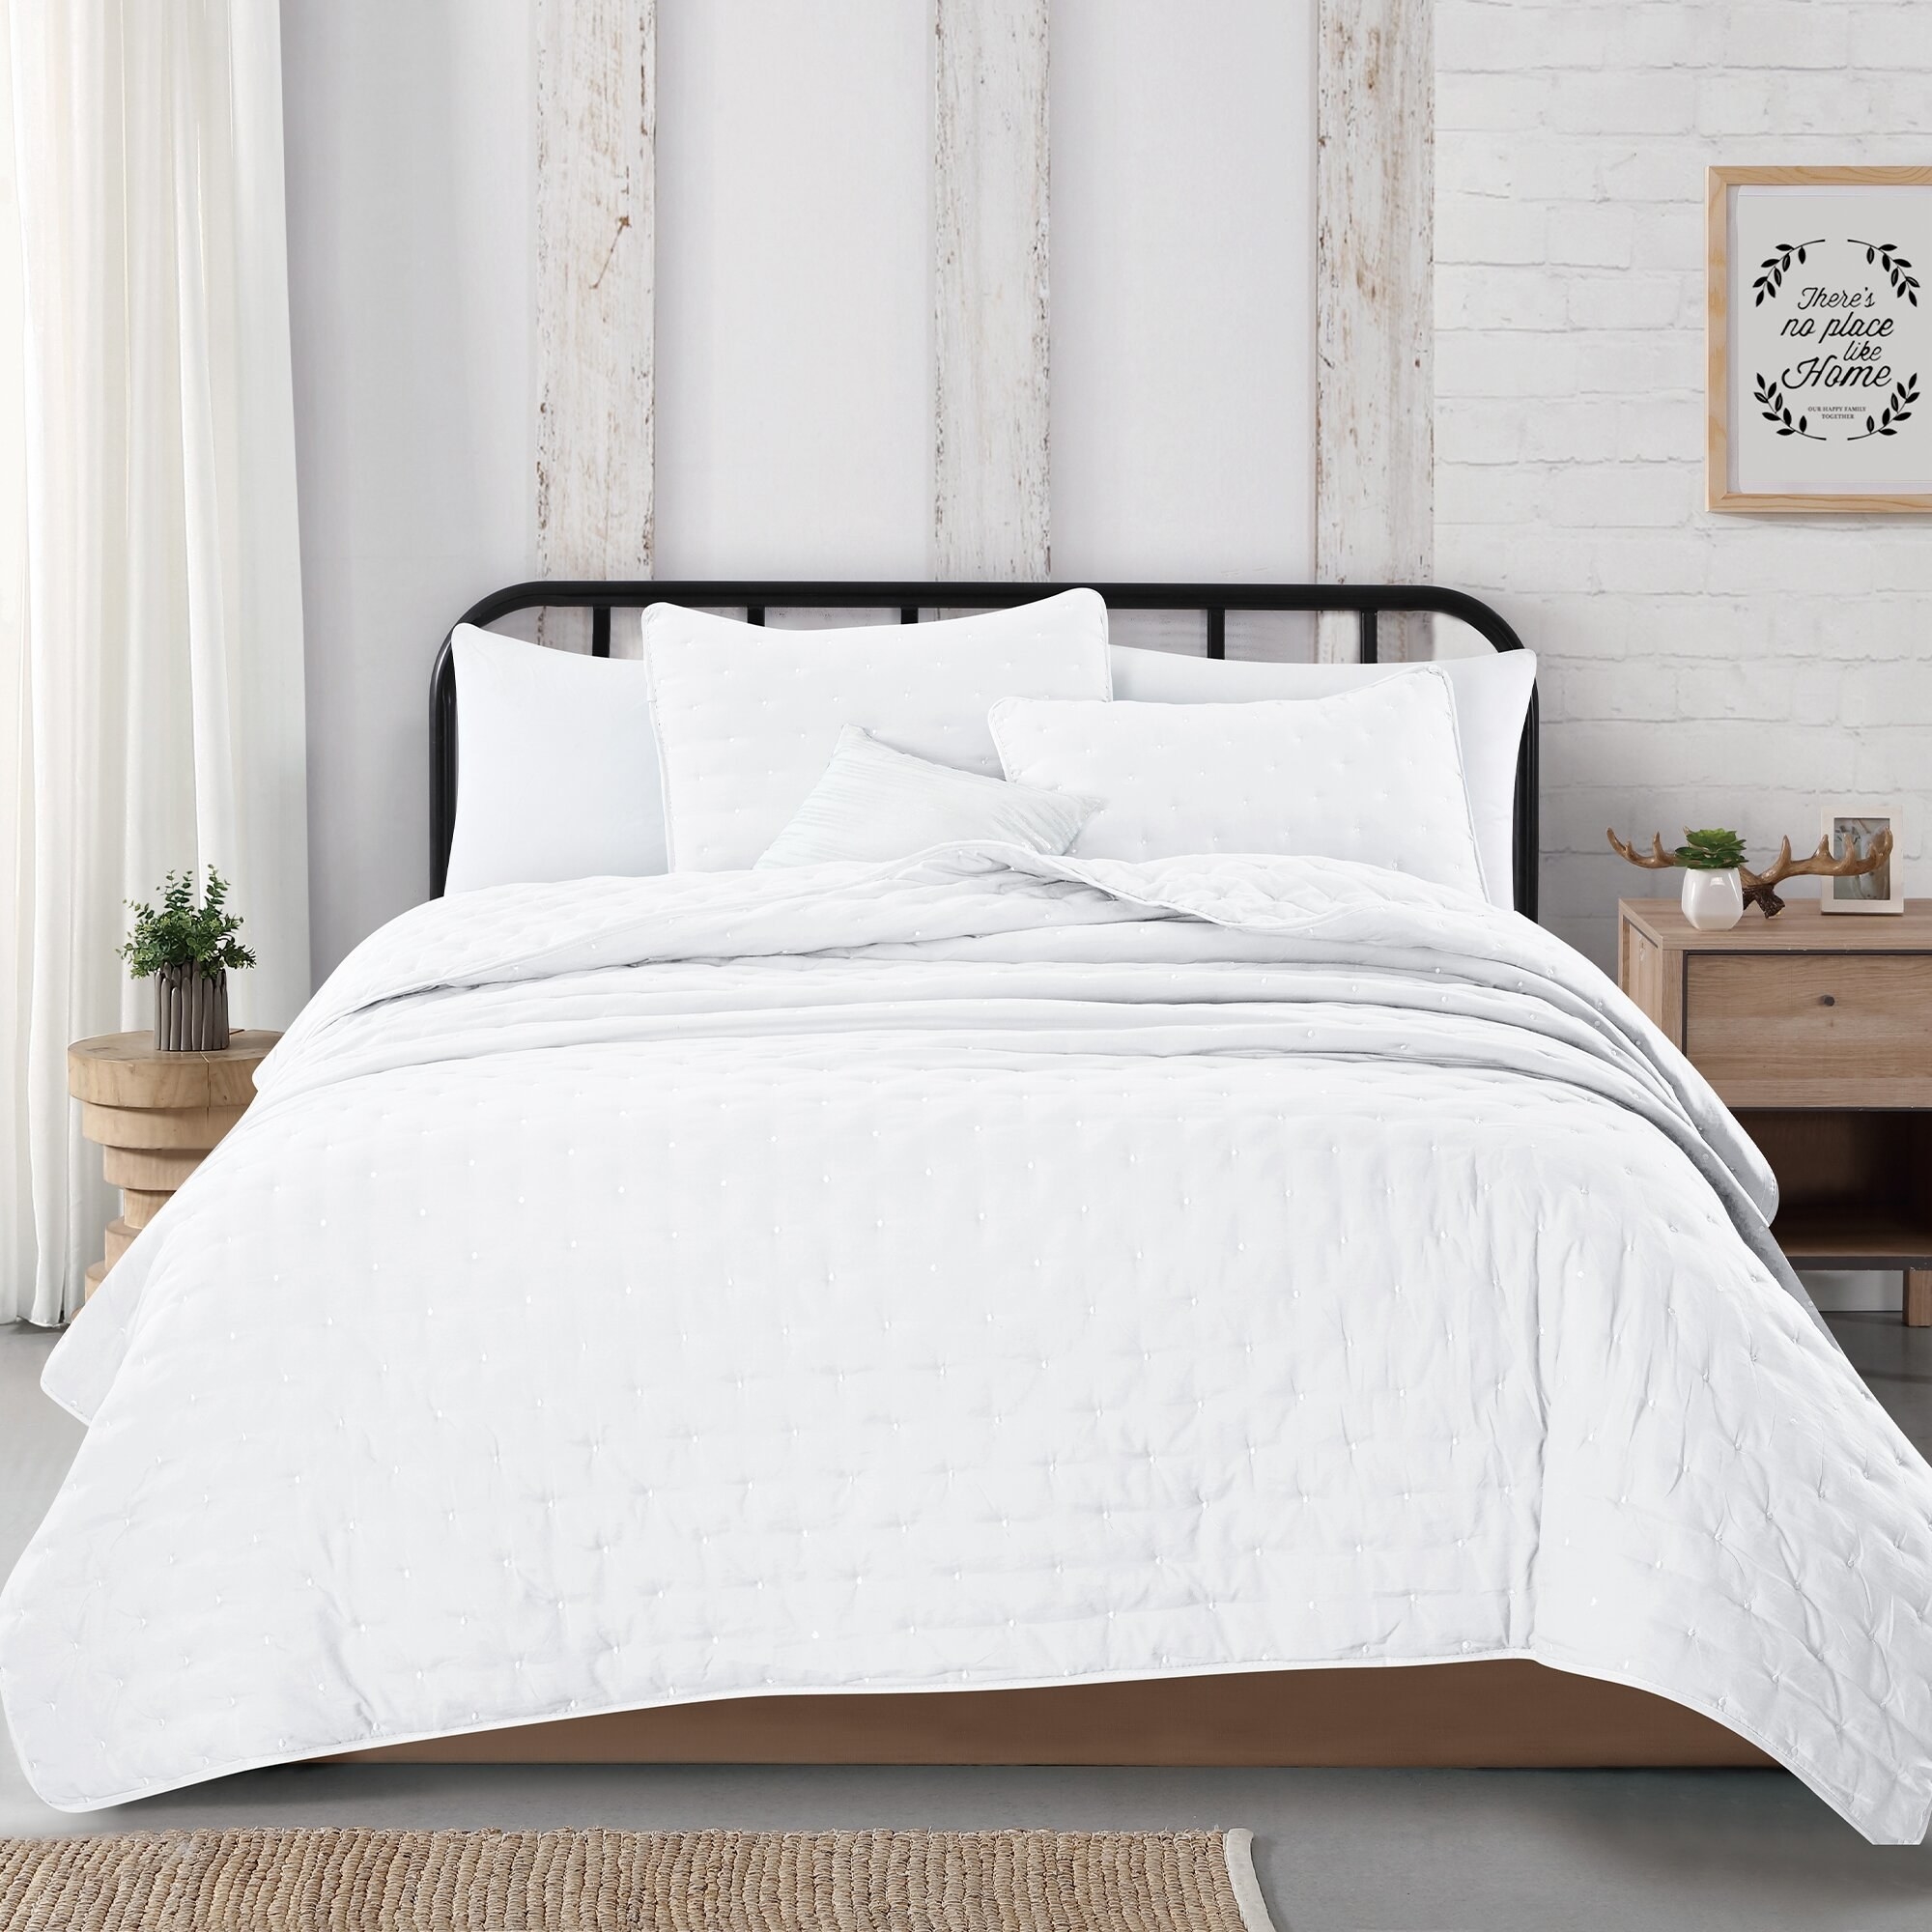 white stitch patterned quilt set on a bed